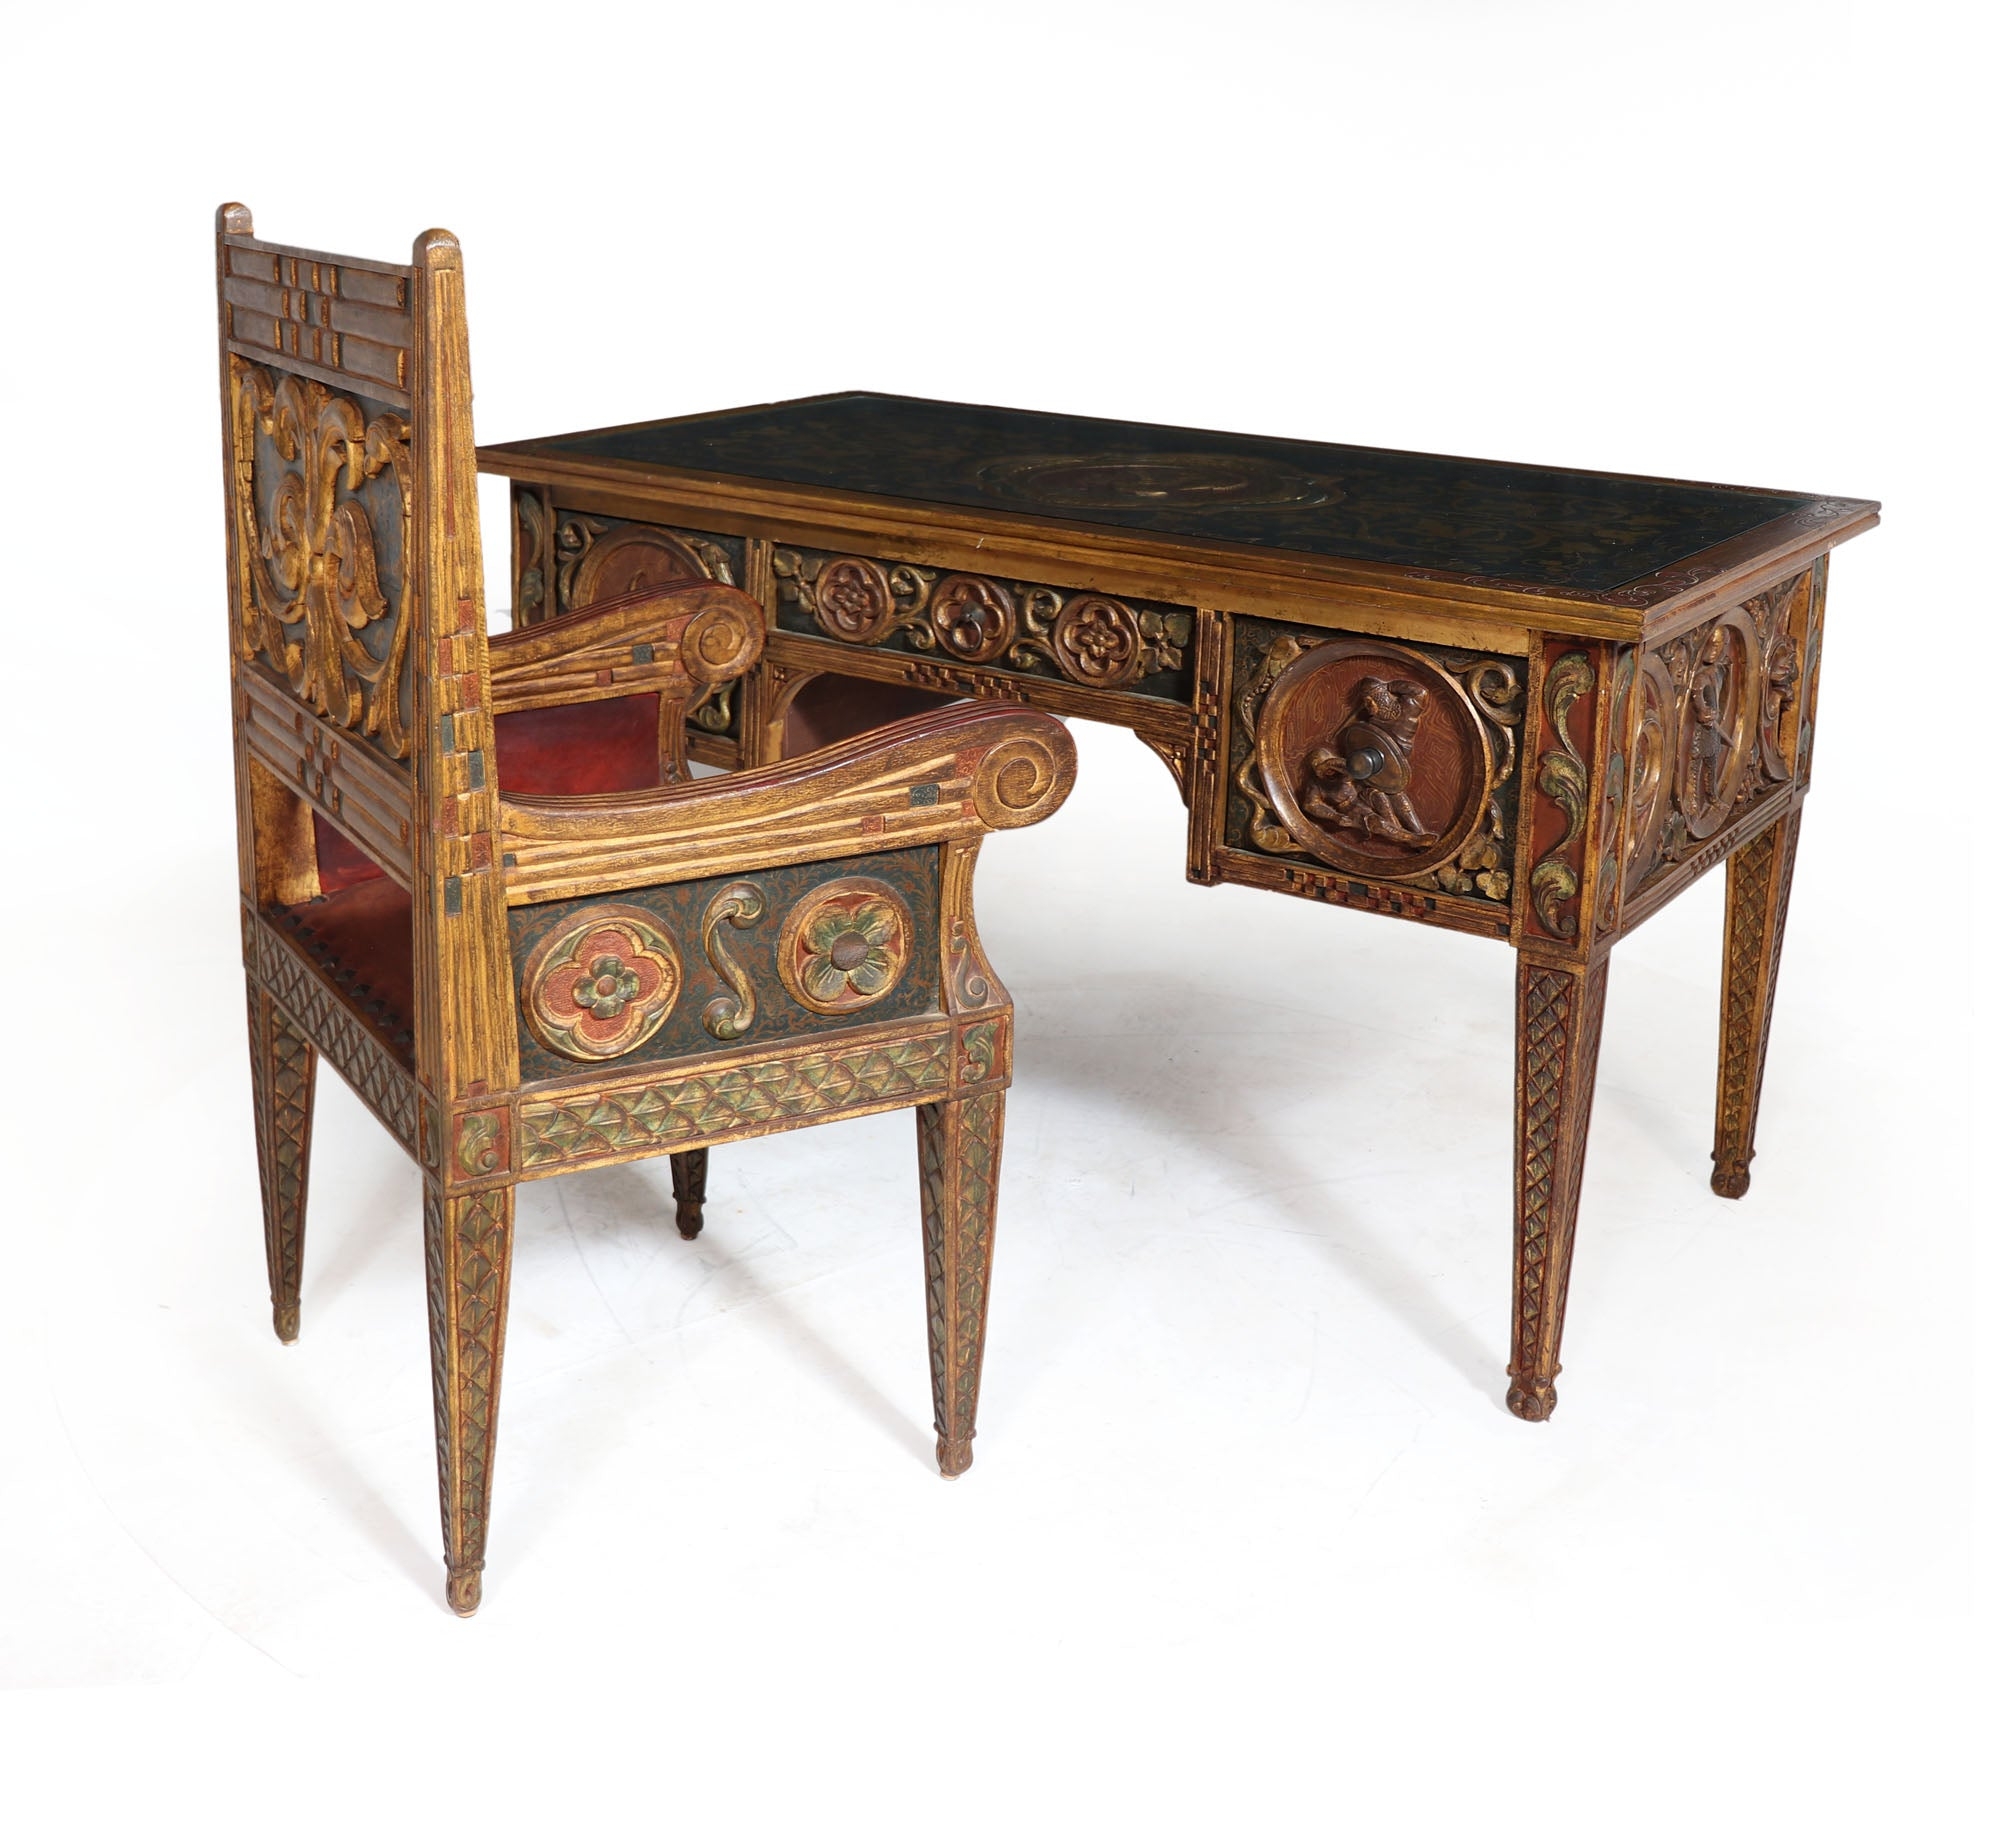 Italian Antique Desk and Chair – The Furniture Rooms